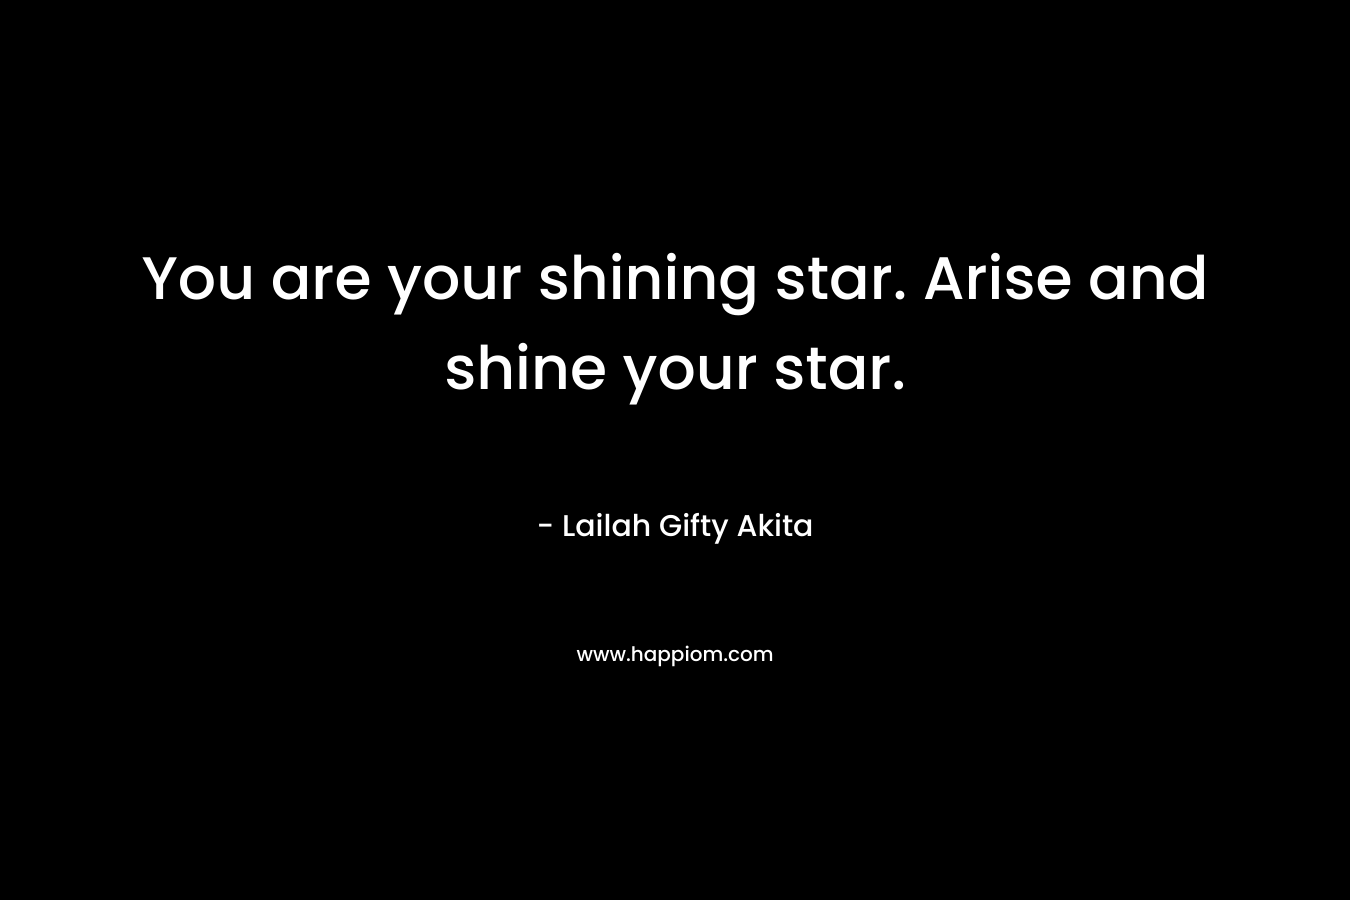 You are your shining star. Arise and shine your star.